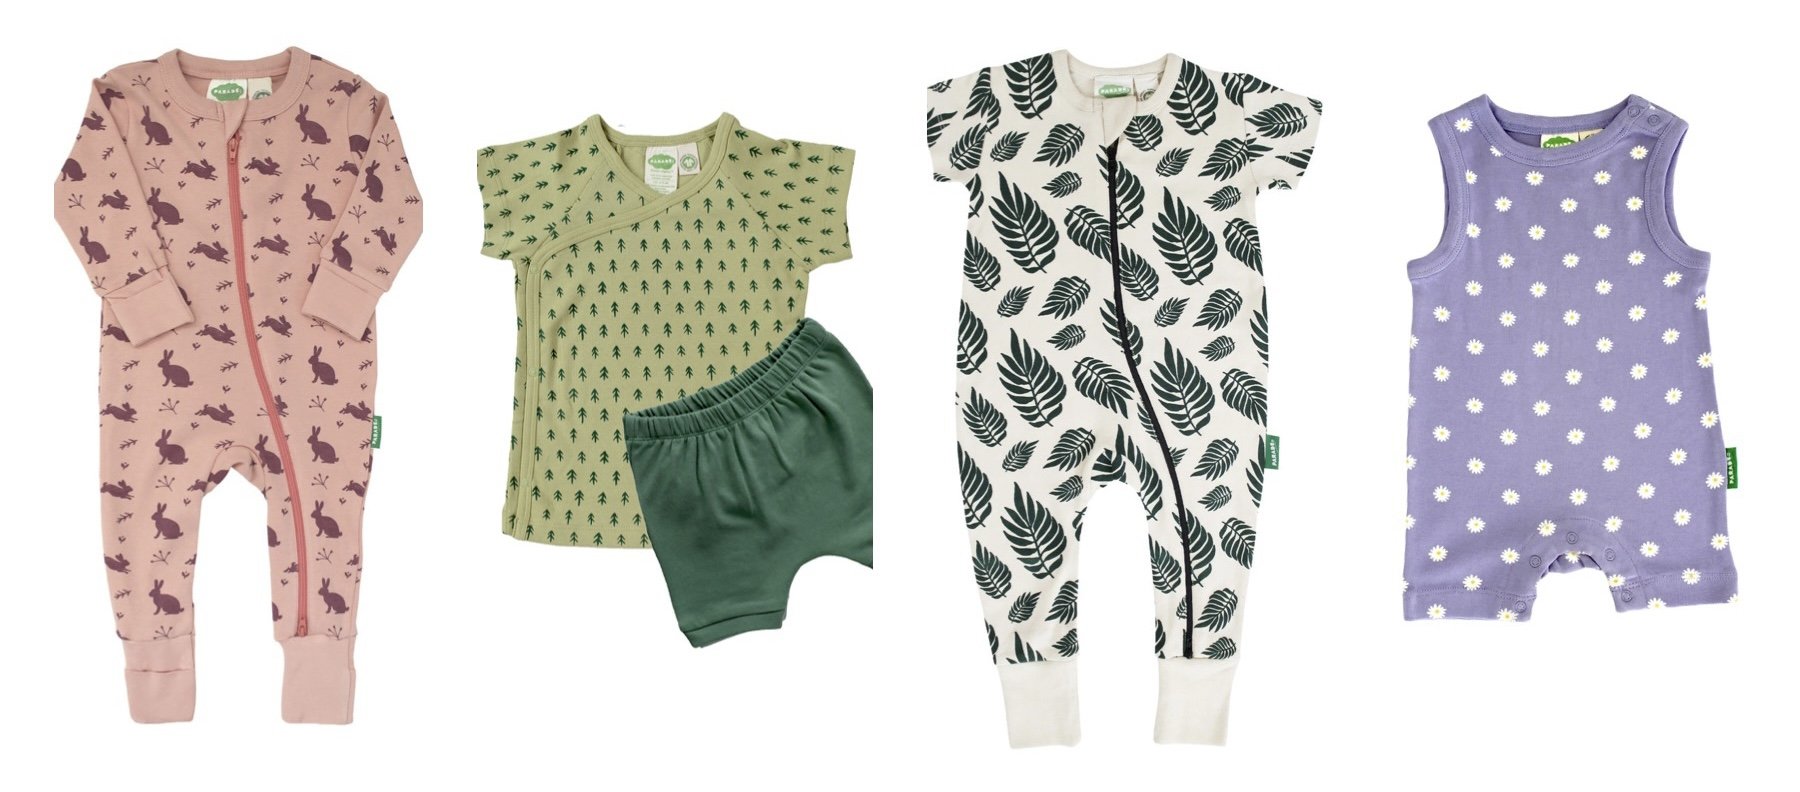 20 Ethical & Organic Clothing Brands For Babies & Kids